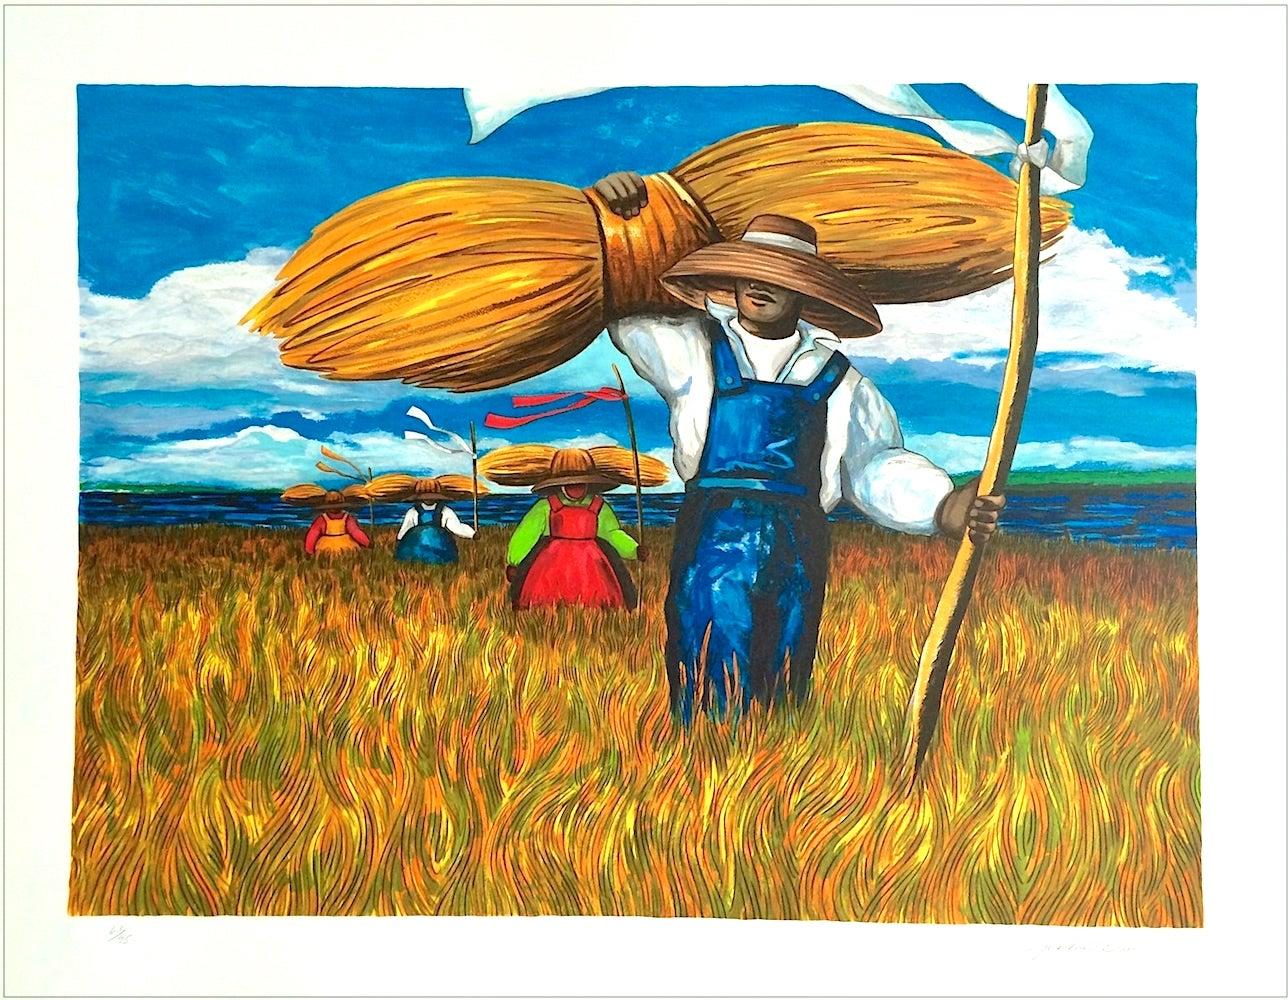 SWEETGRASS CARRIERS Signierte Lithographie, South Carolina Lowcountry, Gullah Culture – Print von Jonathan Green